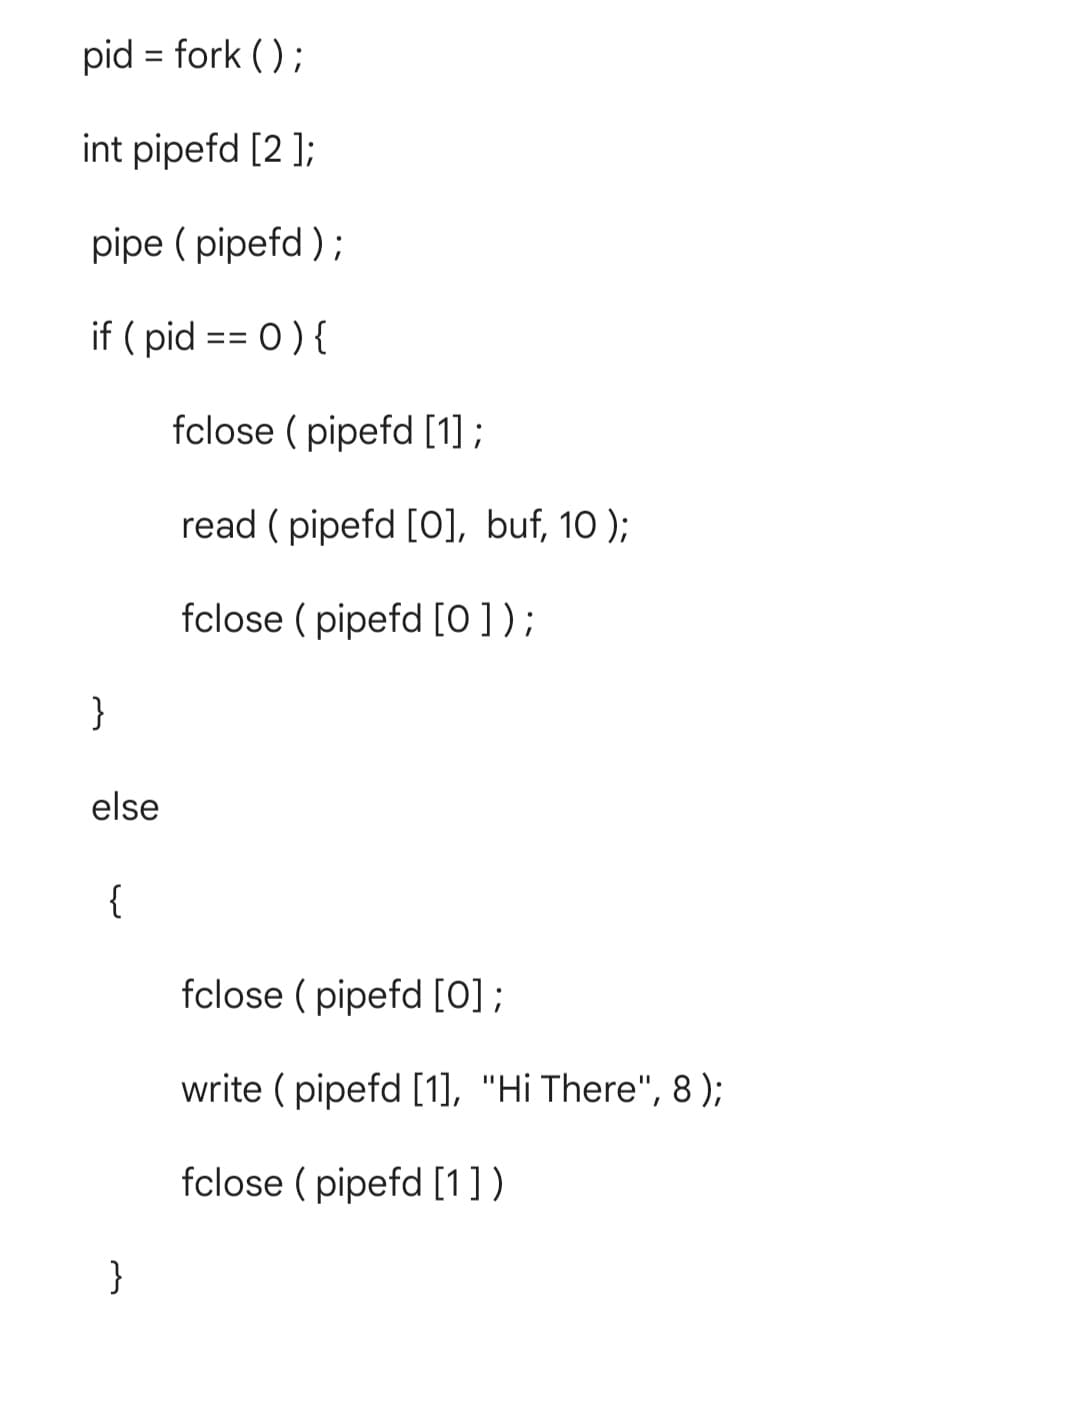 pid = fork ();
%3D
int pipefd [2 ];
pipe ( pipefd );
if ( pid == 0) {
fclose ( pipefd [1] ;
read ( pipefd [0], buf, 10 );
fclose ( pipefd [0] );
}
else
{
fclose ( pipefd [0];
write ( pipefd [1], "Hi There", 8 );
fclose ( pipefd [1] )
}
